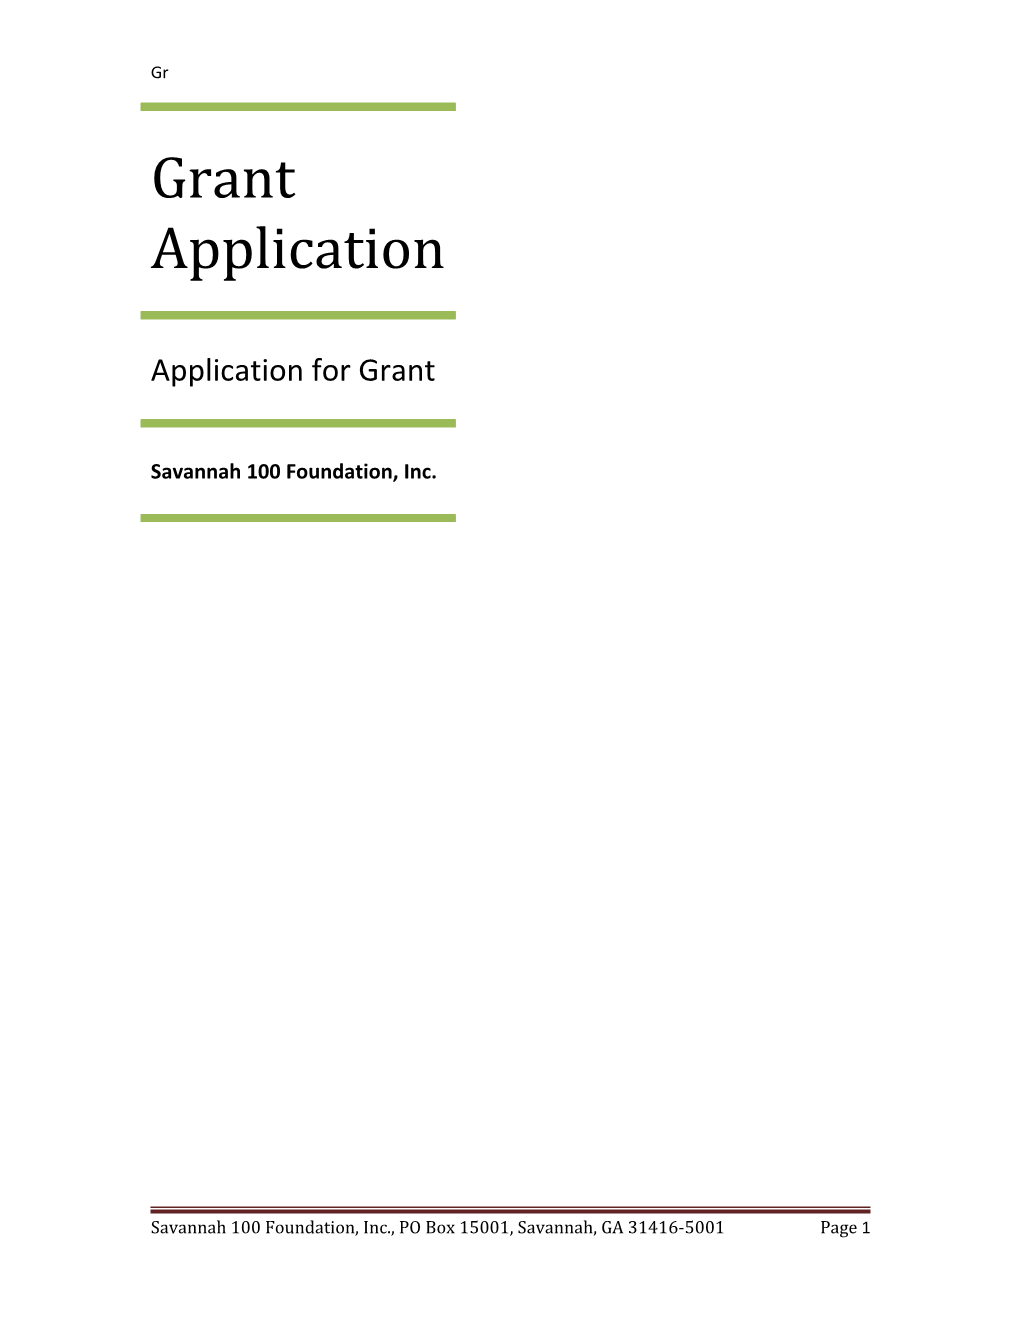 Please Submit Your Grant Application Using the Template Below